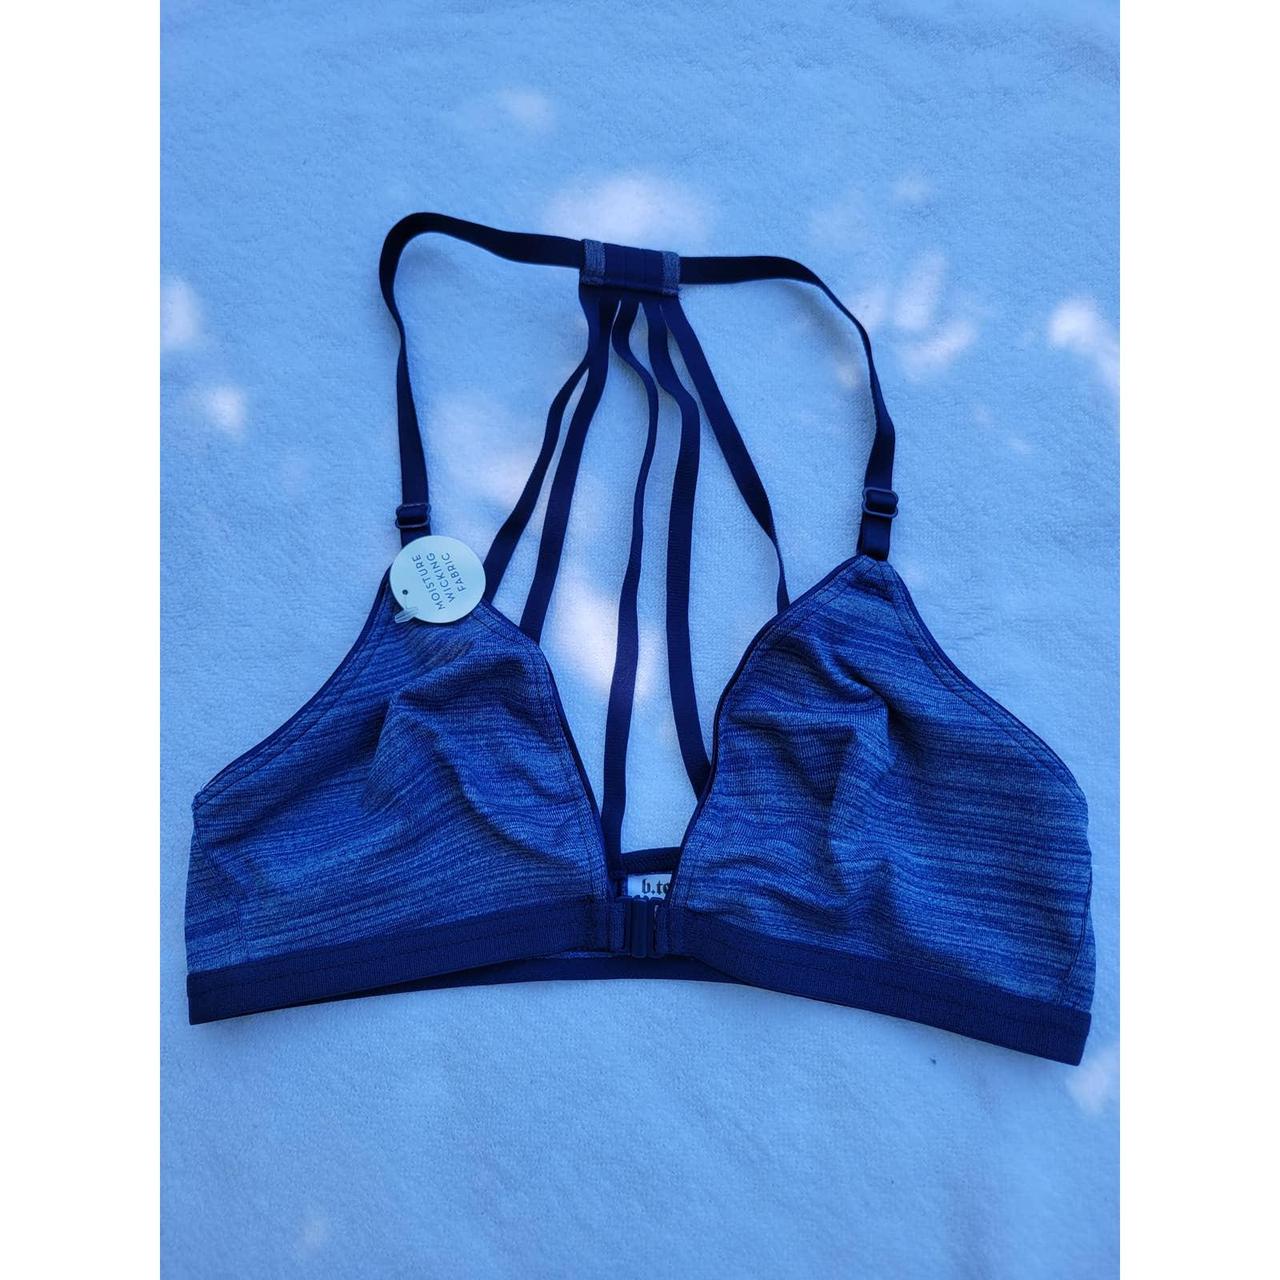 Product Image 1 - B. Tempt’d bralette
Size Small
Blue 
New